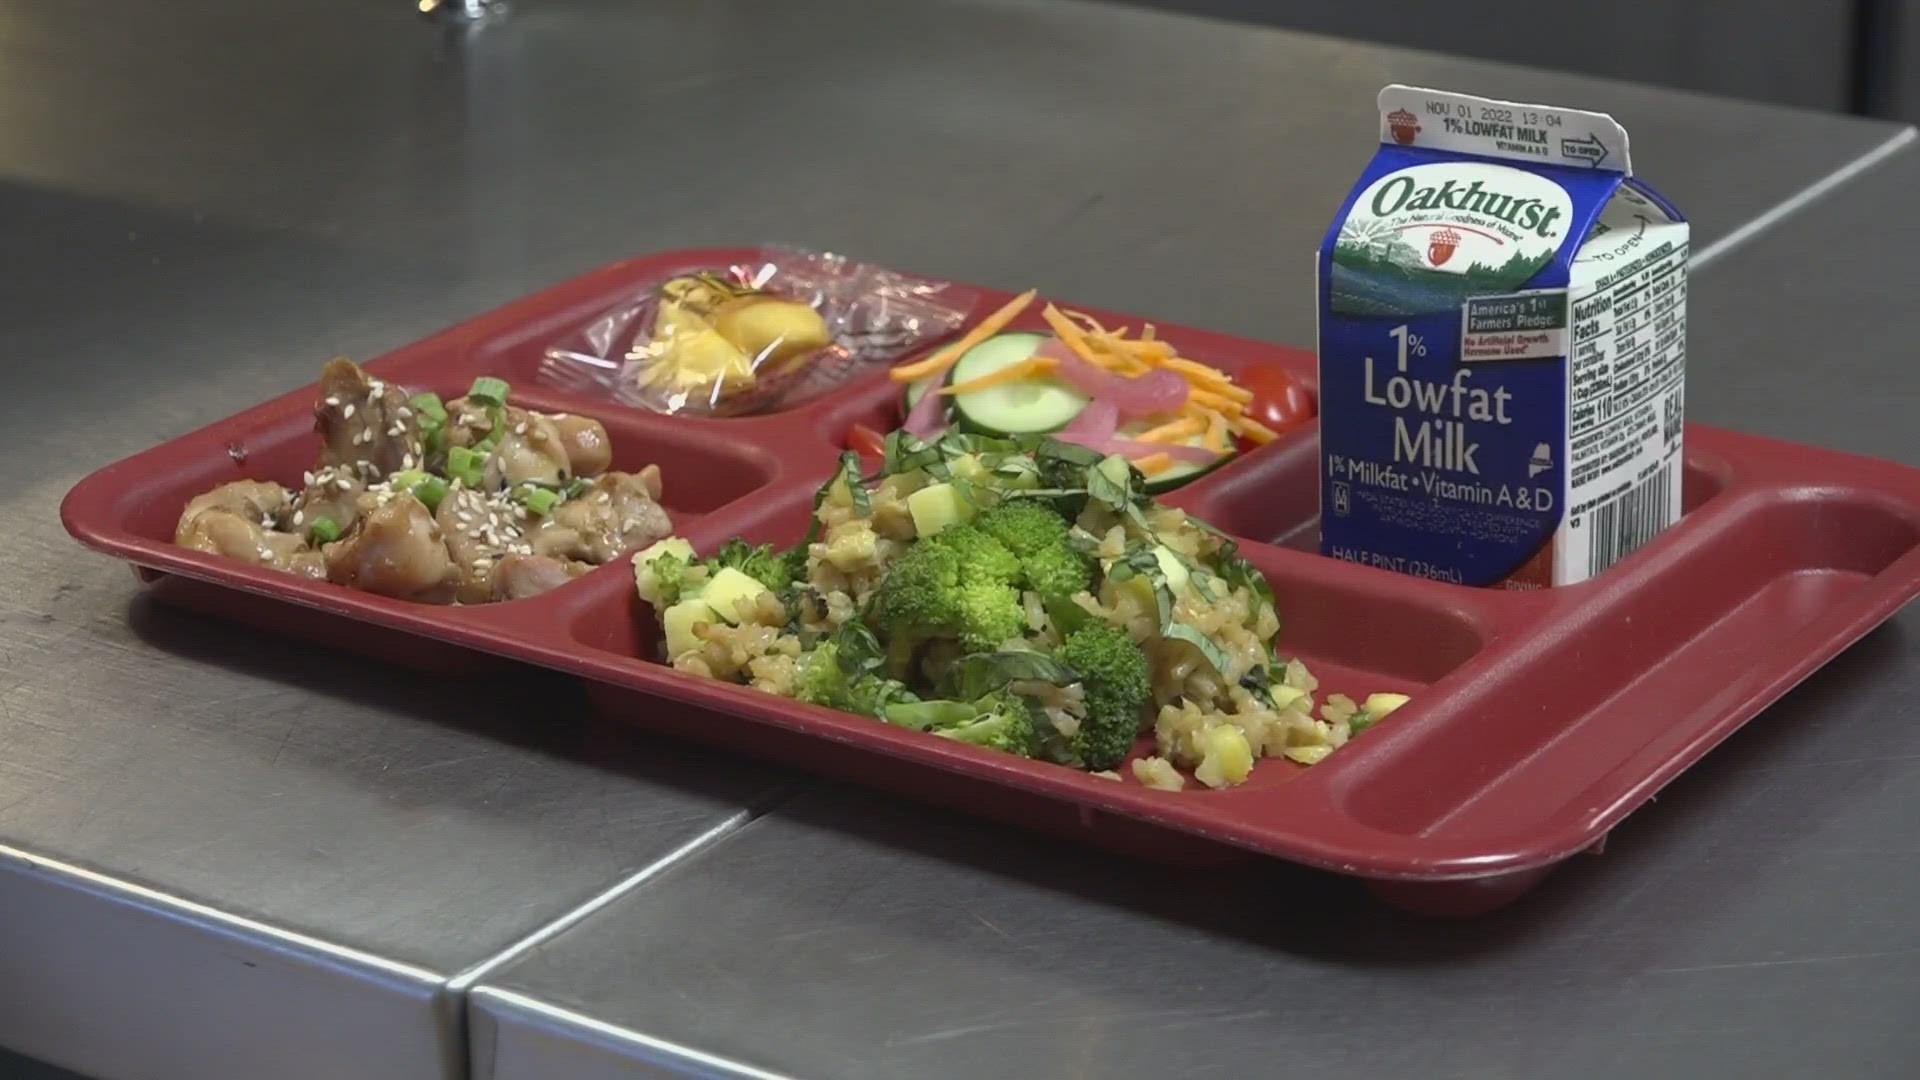 Supporters say schools aren't giving students enough time to eat, and it's contributing to food waste. A work session for the bill is scheduled for March 29.